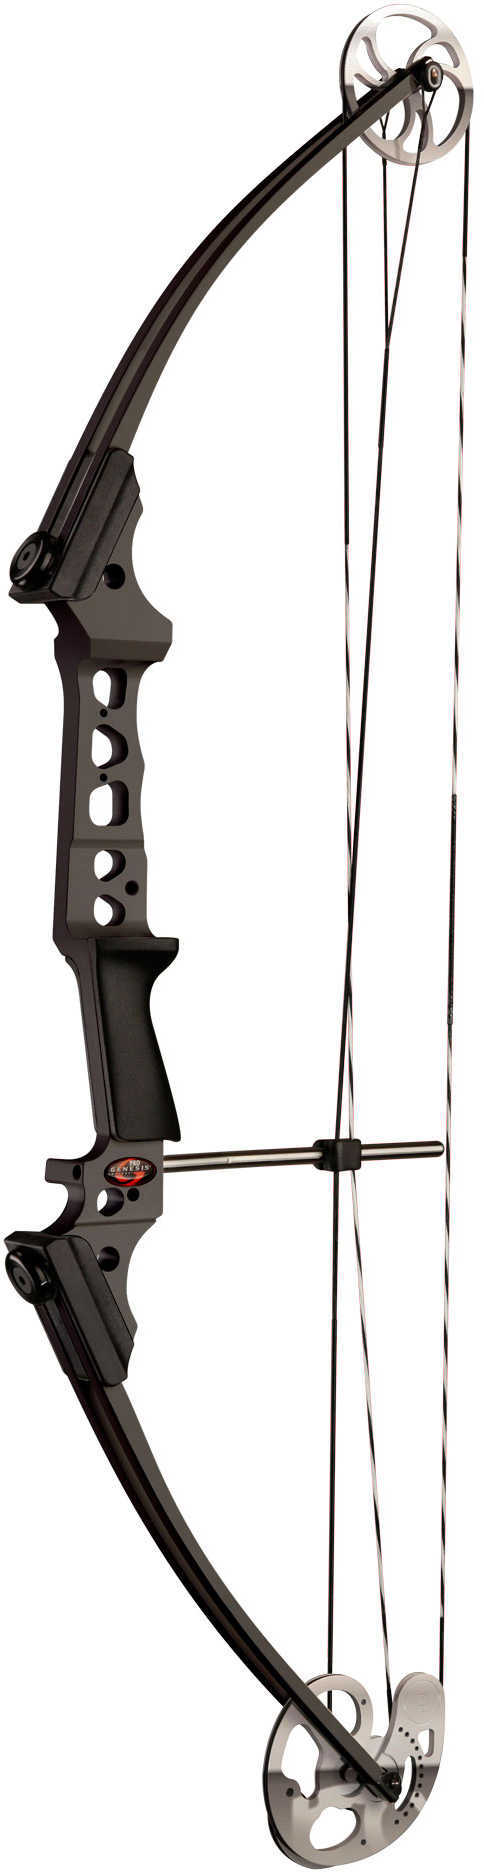 Genesis Pro Bow Left Handed Black Only 10491A